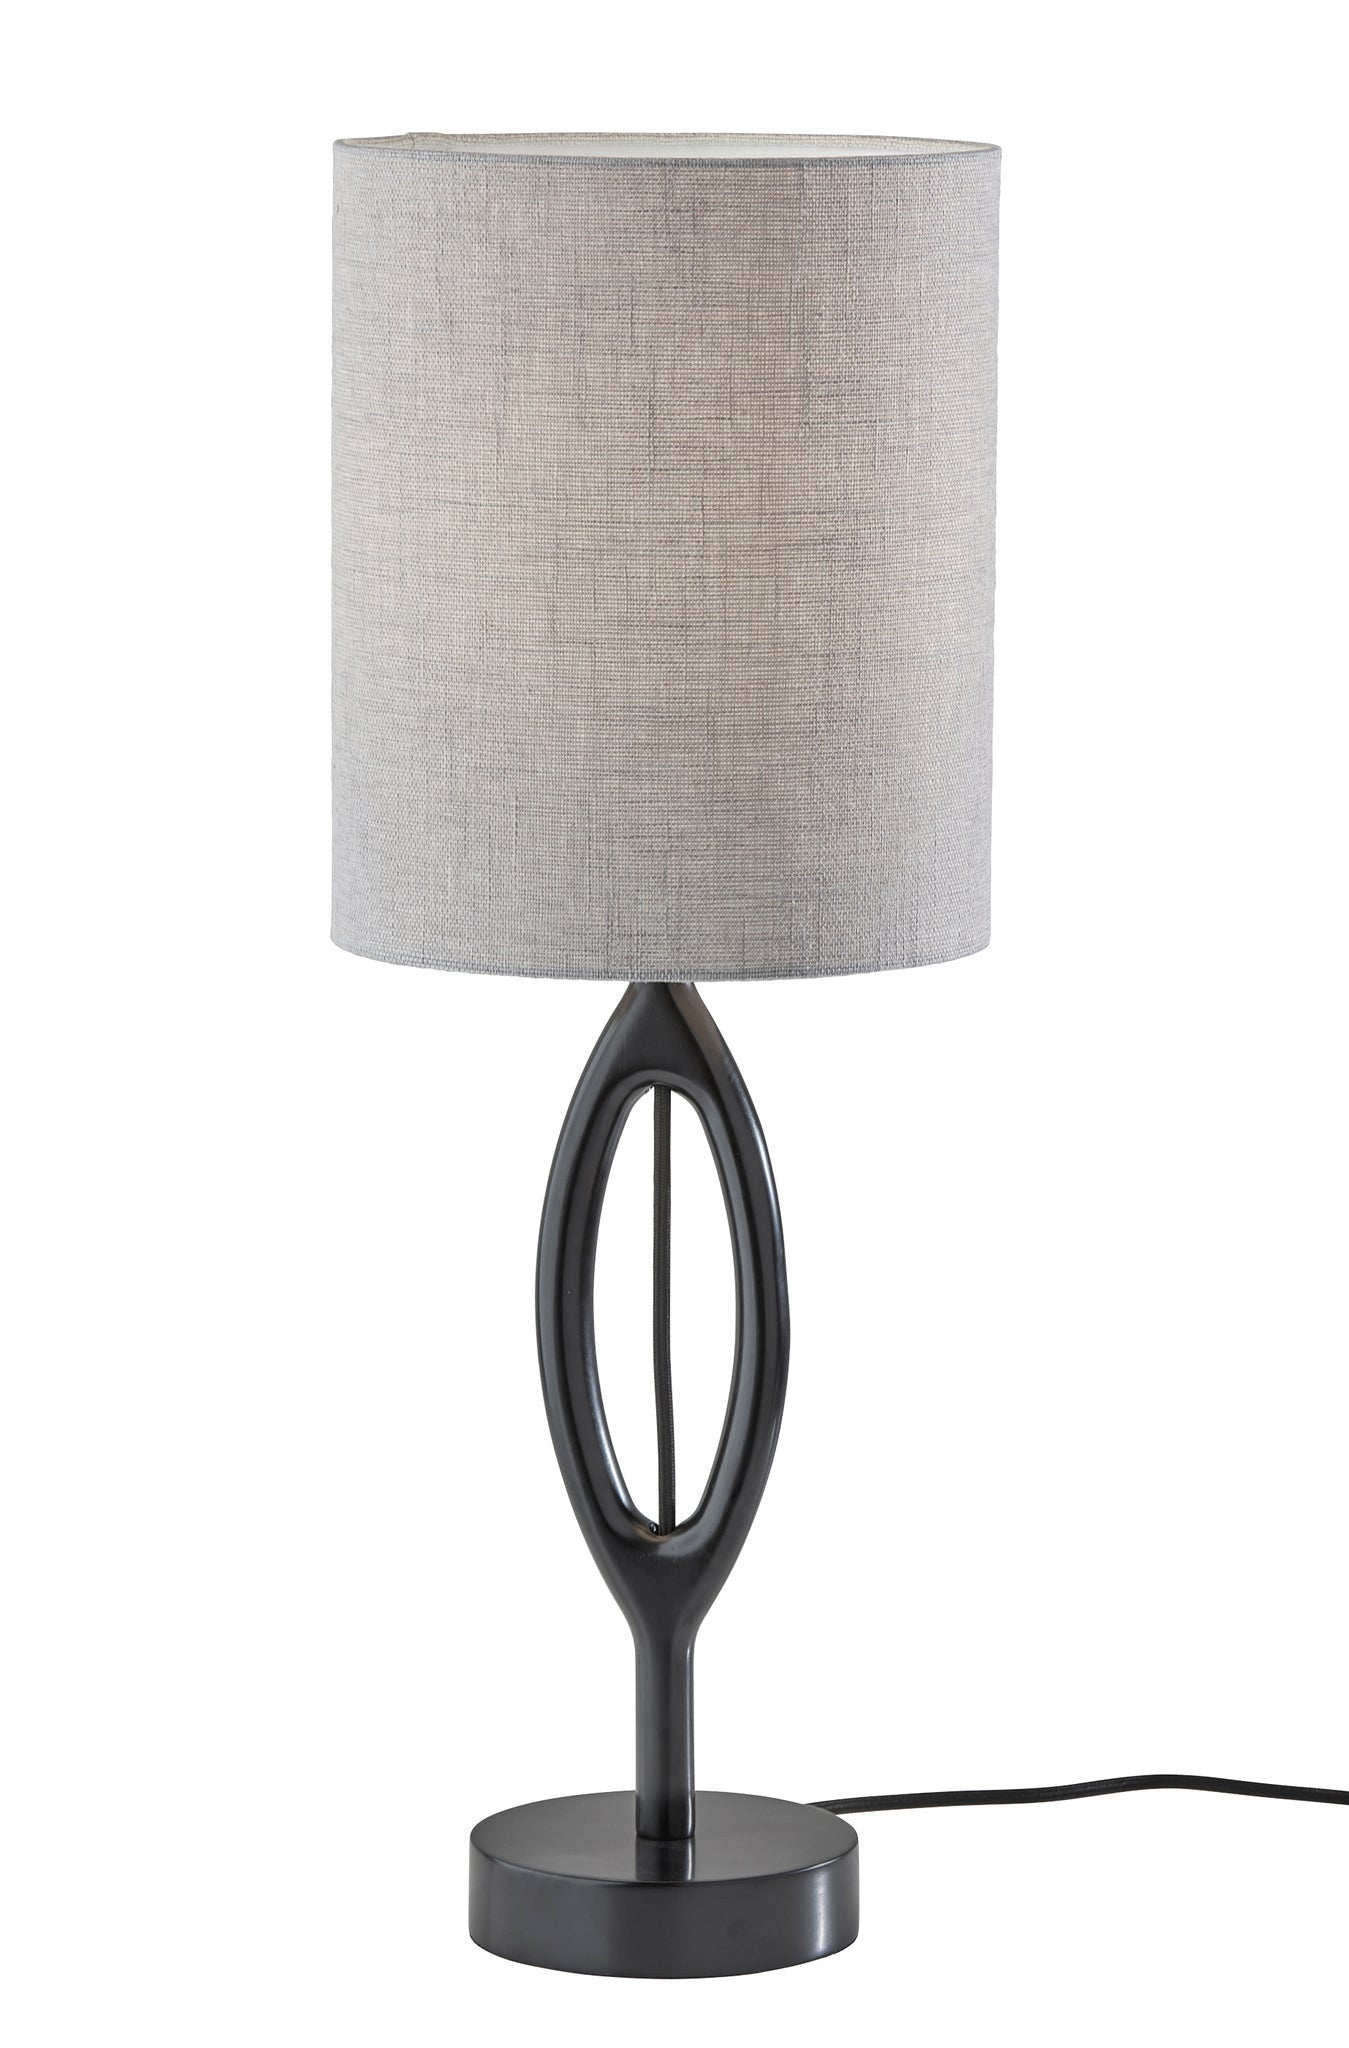 28" Black Solid Wood Round Table Lamp With Gray Drum Shade